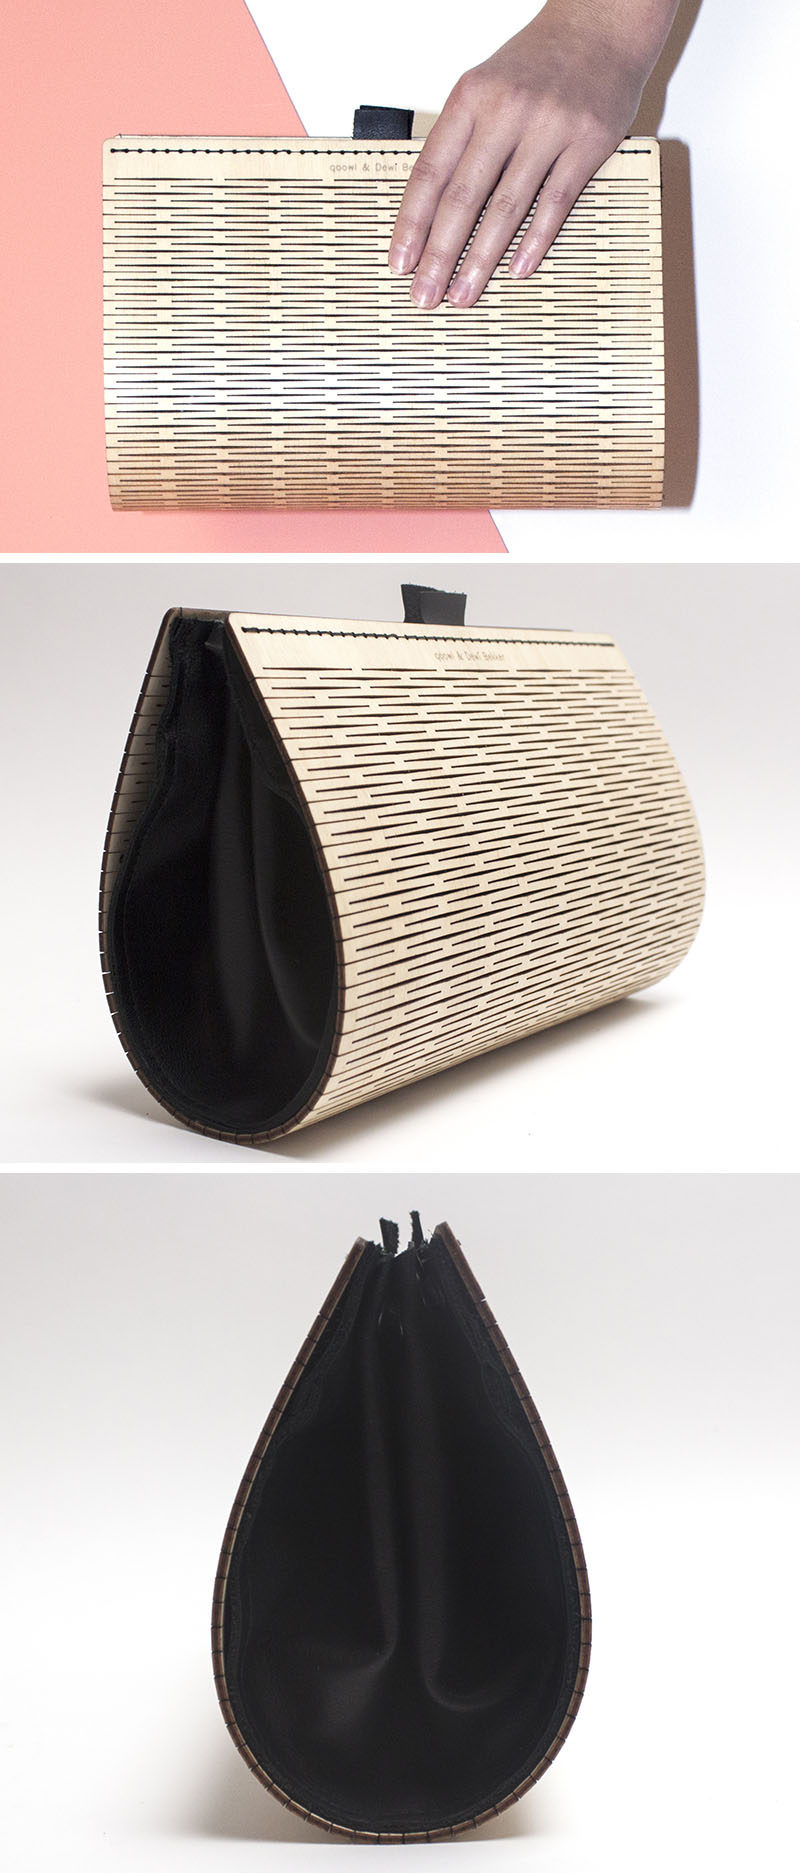 This fashionable women's clutch named PLAAT, has an exterior made from wood that's been laser cut, while the interior is made from a black leather. The clutch is also designed so that it can become a handbag or a shoulder bag too.